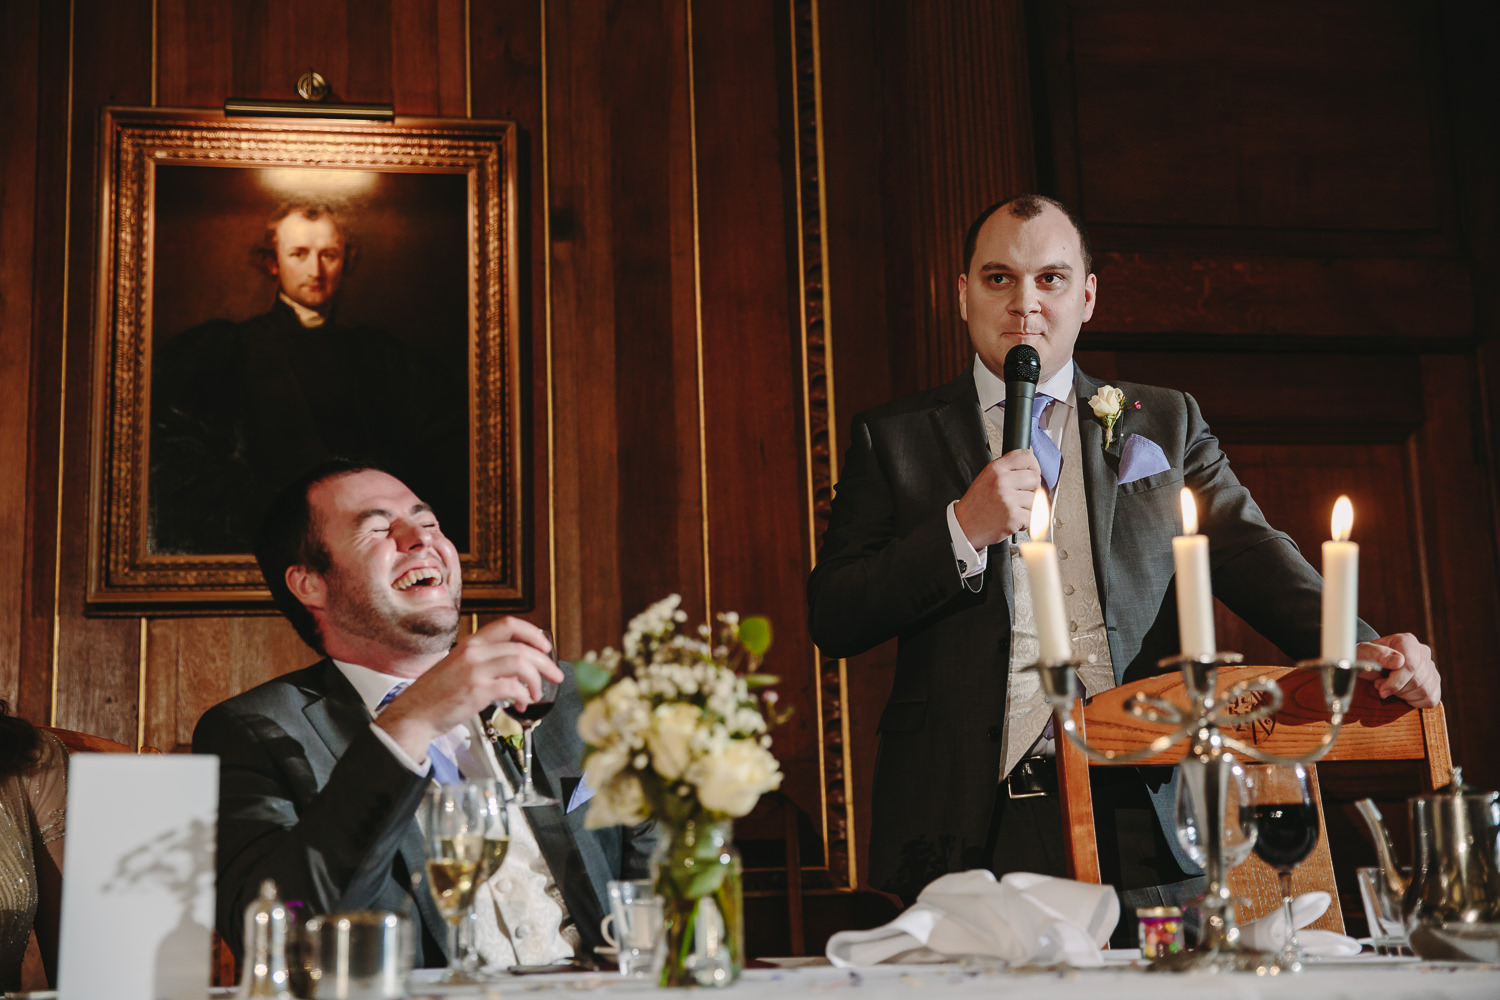 Best man giving a wedding speech inside the candlelit hall at selwyn college Cambridge university. Groom is laughing.